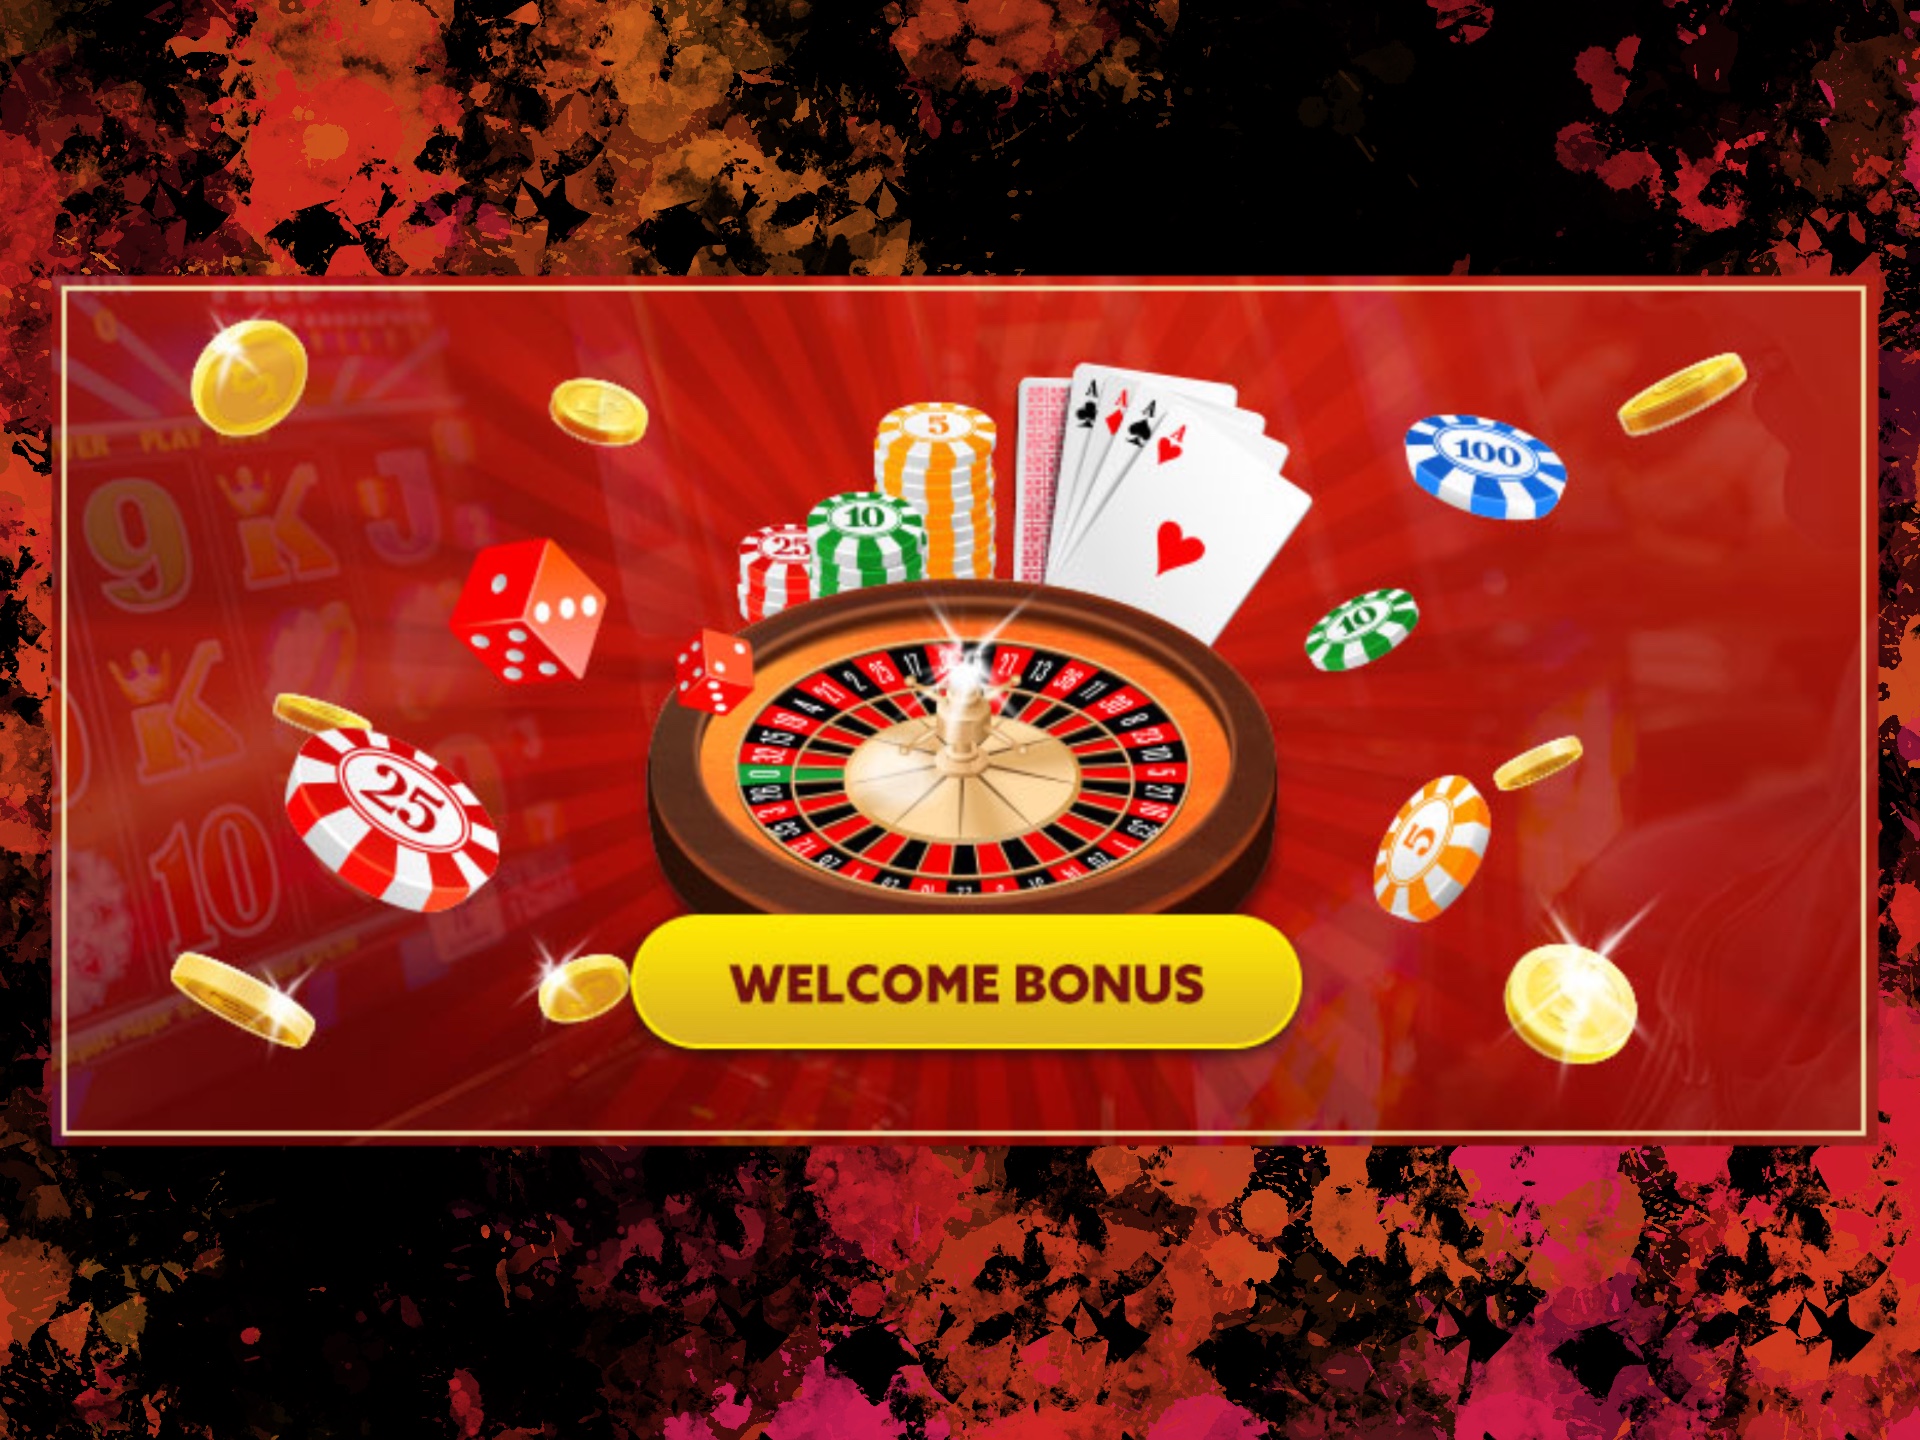 All the modern casinos have welcome bonus to give you an advatage for your first time at an online casino.